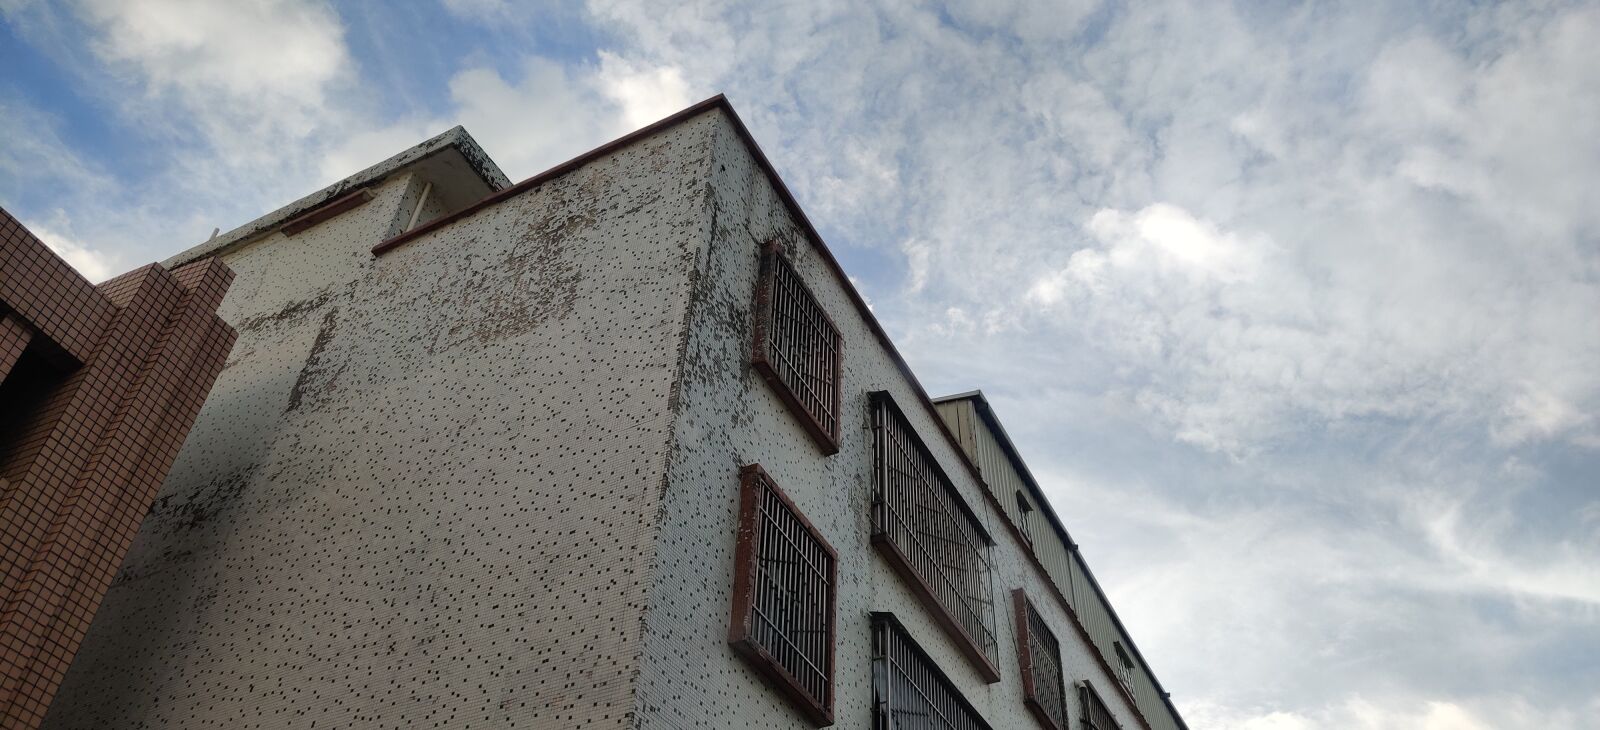 OnePlus GM1910 sample photo. Sky, street view, building photography